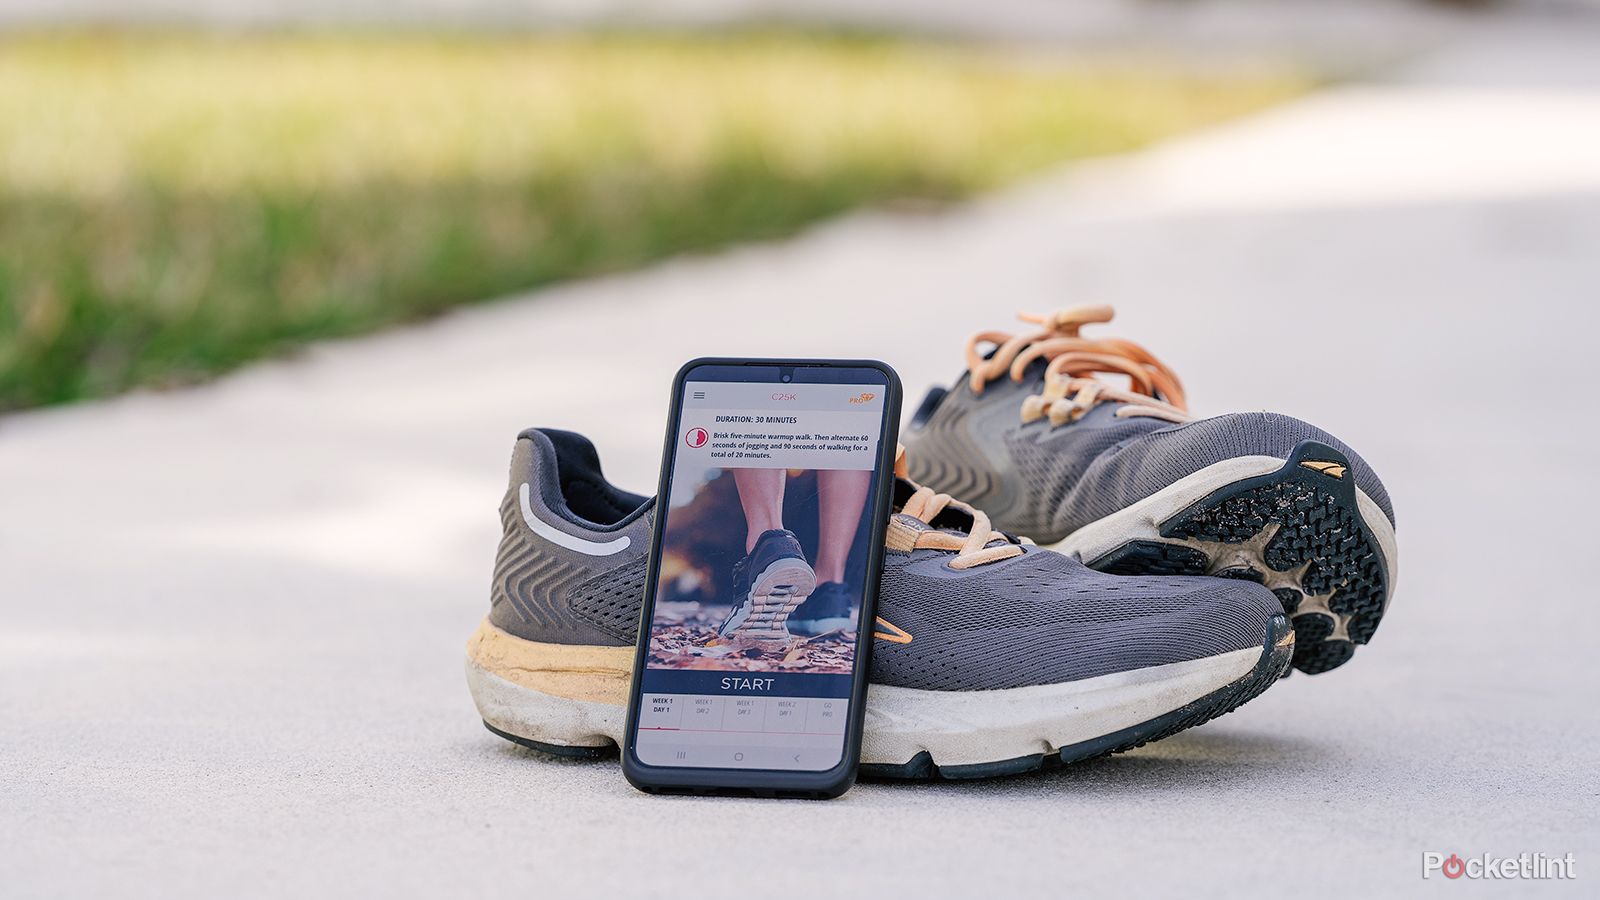 An Android phone sits on a pair of running shoes